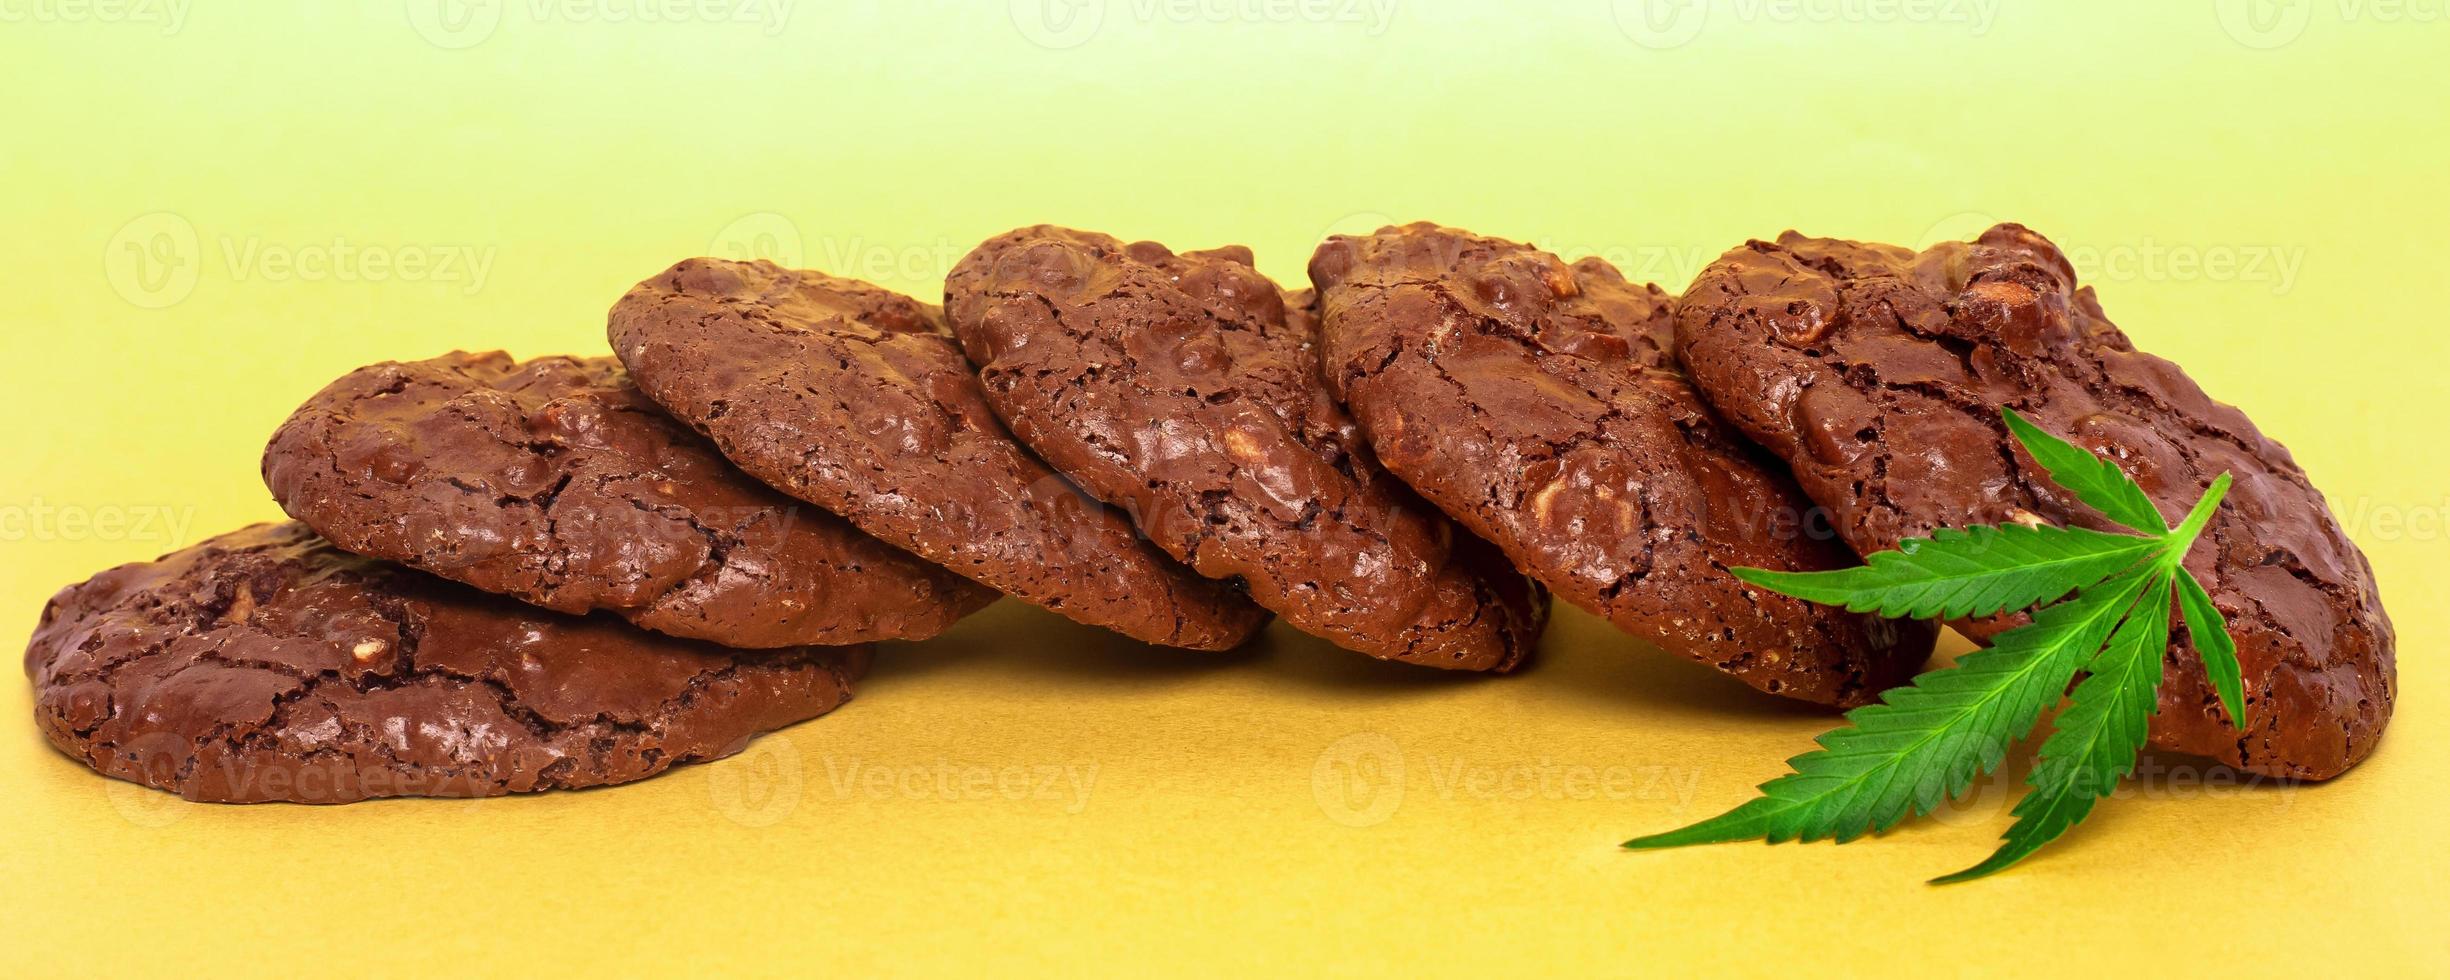 Oatmeal cookies and green cannabis leaf on a yellow background photo